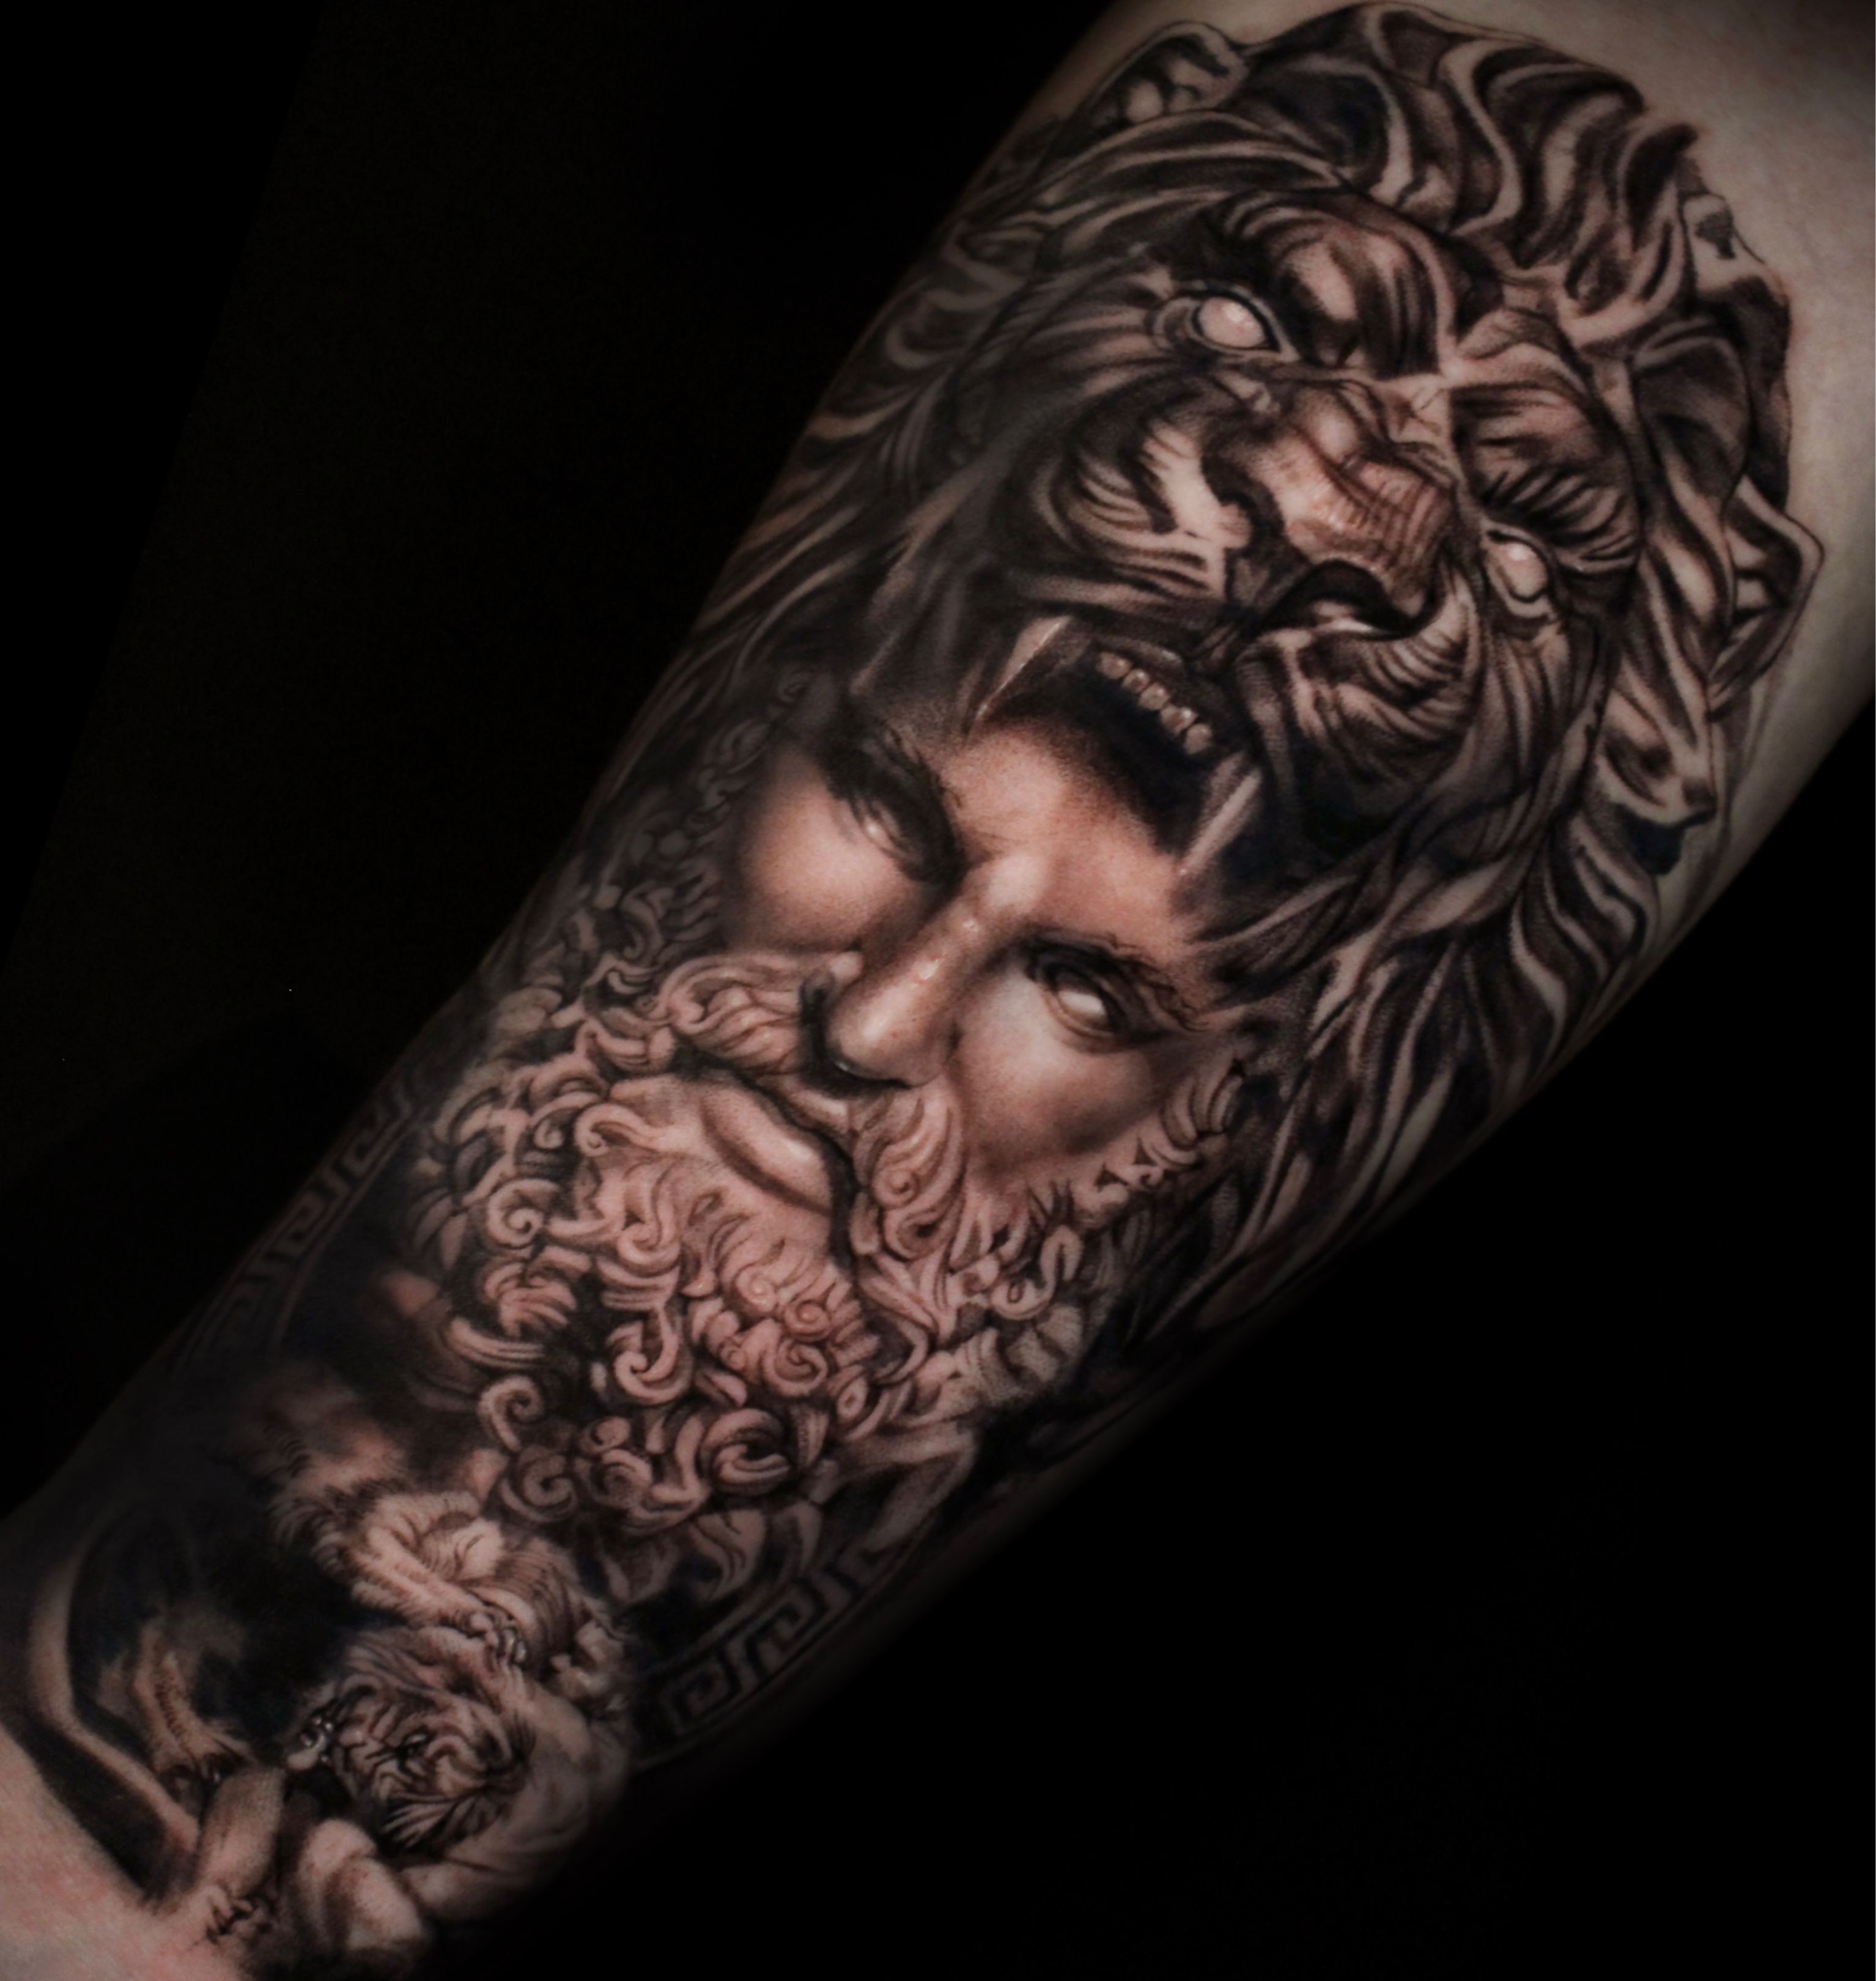 Tattoo based on the statue of Heracles and Achelous